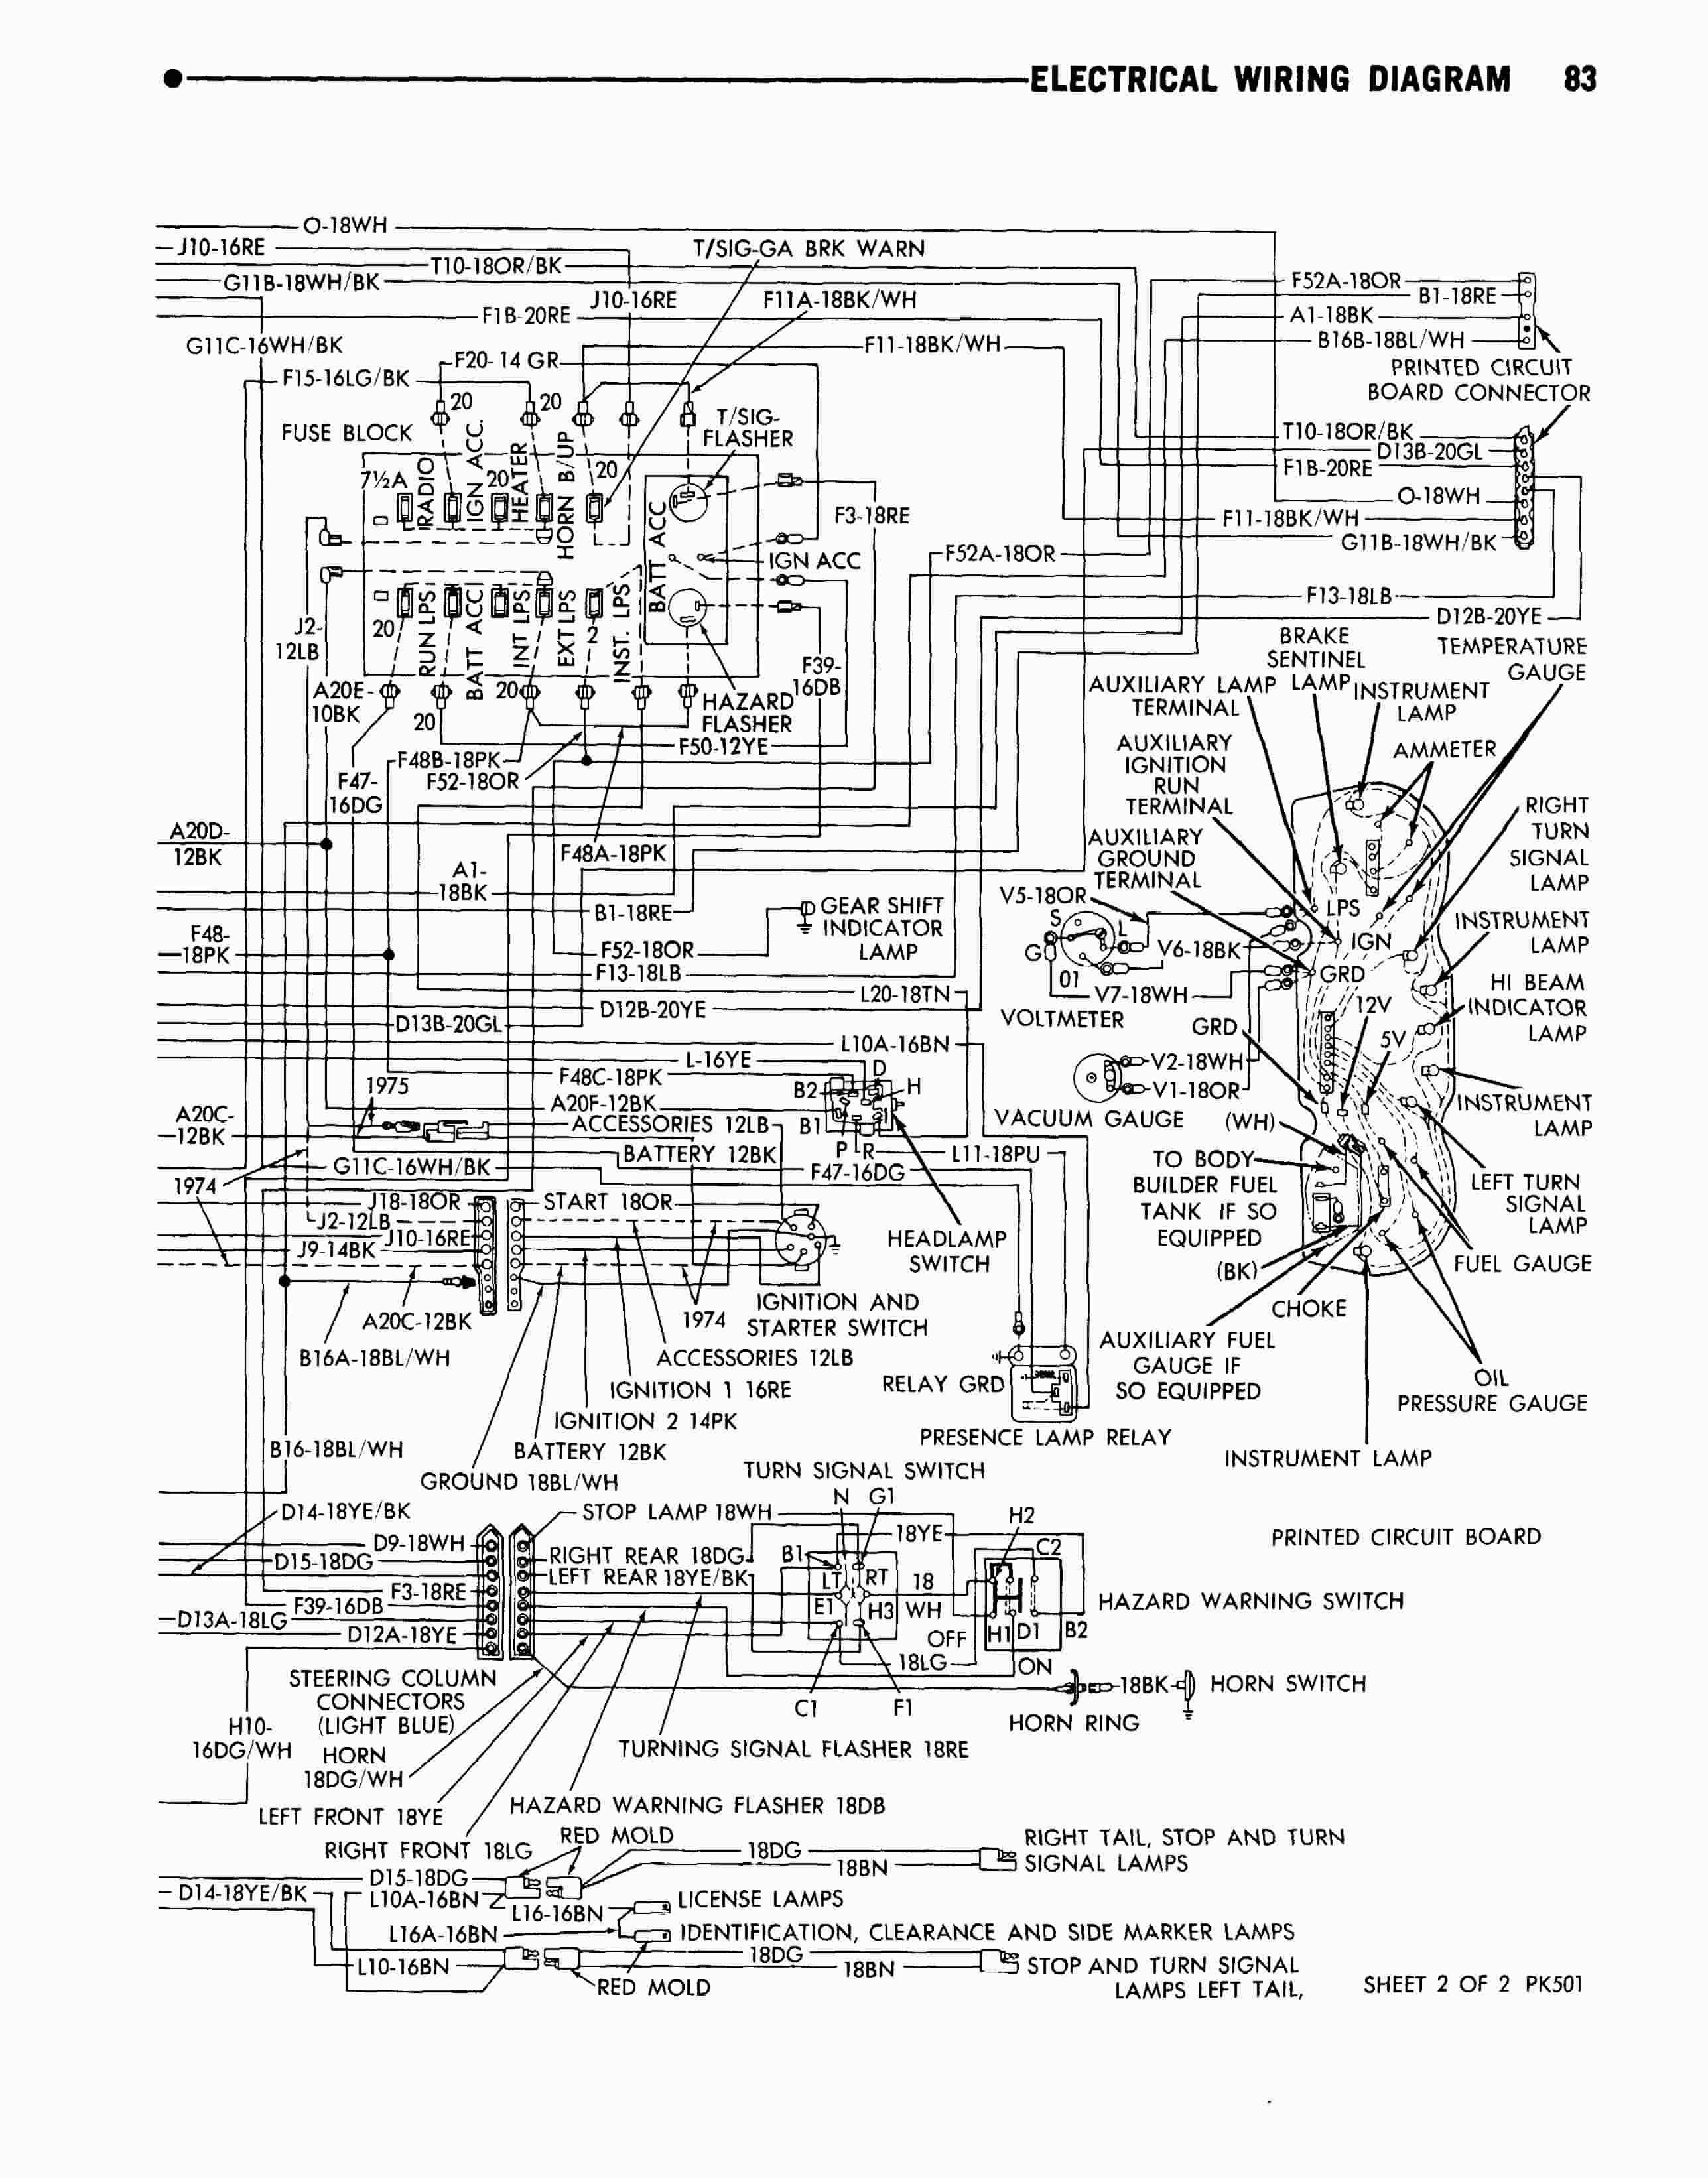 Dave's Place - 74-75 Dodge Class A Chassis Wiring Diagram